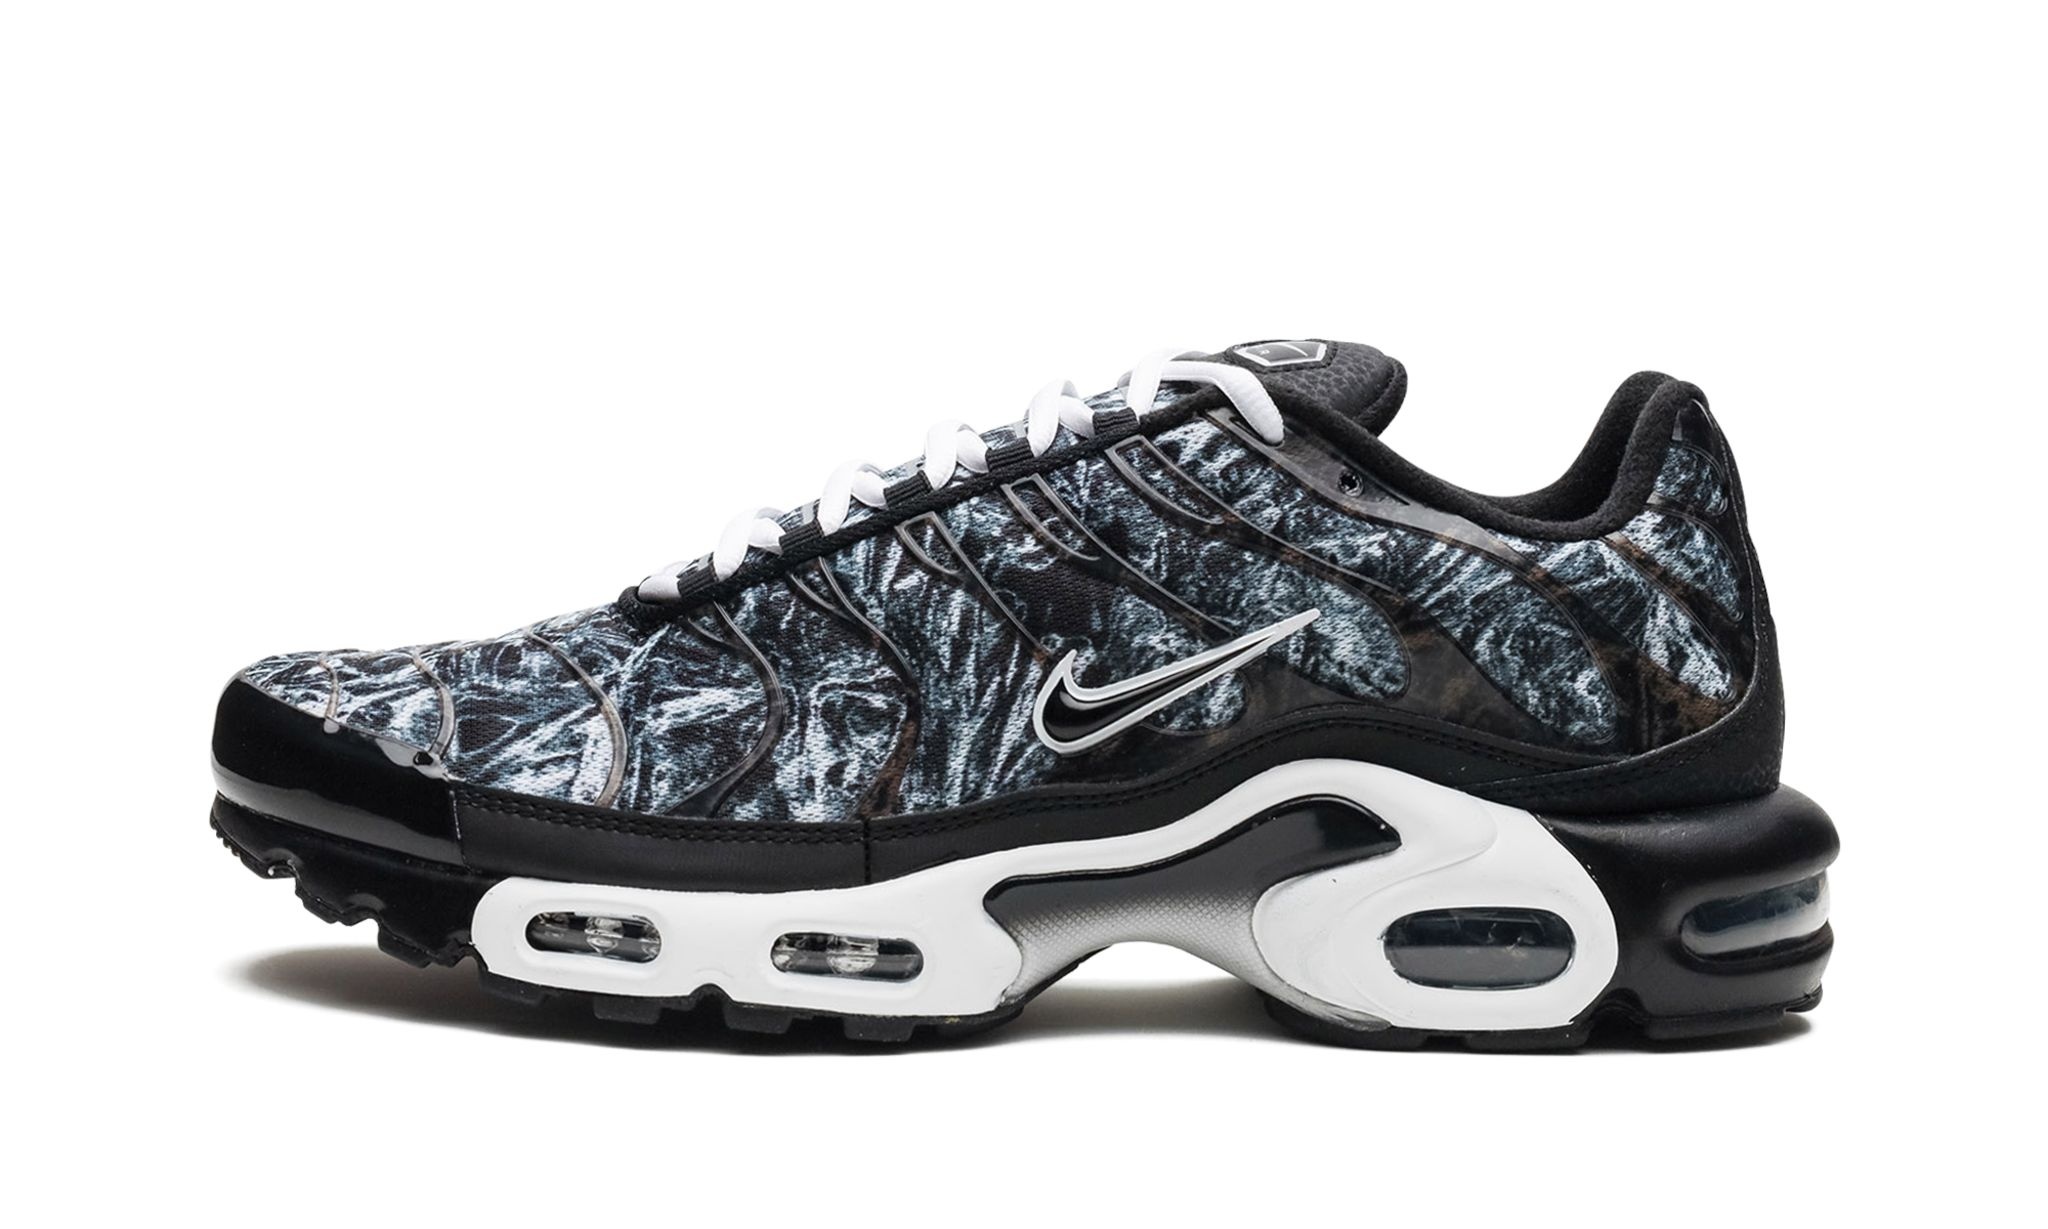 Air Max Plus AMP "Shattered Ice" - 1